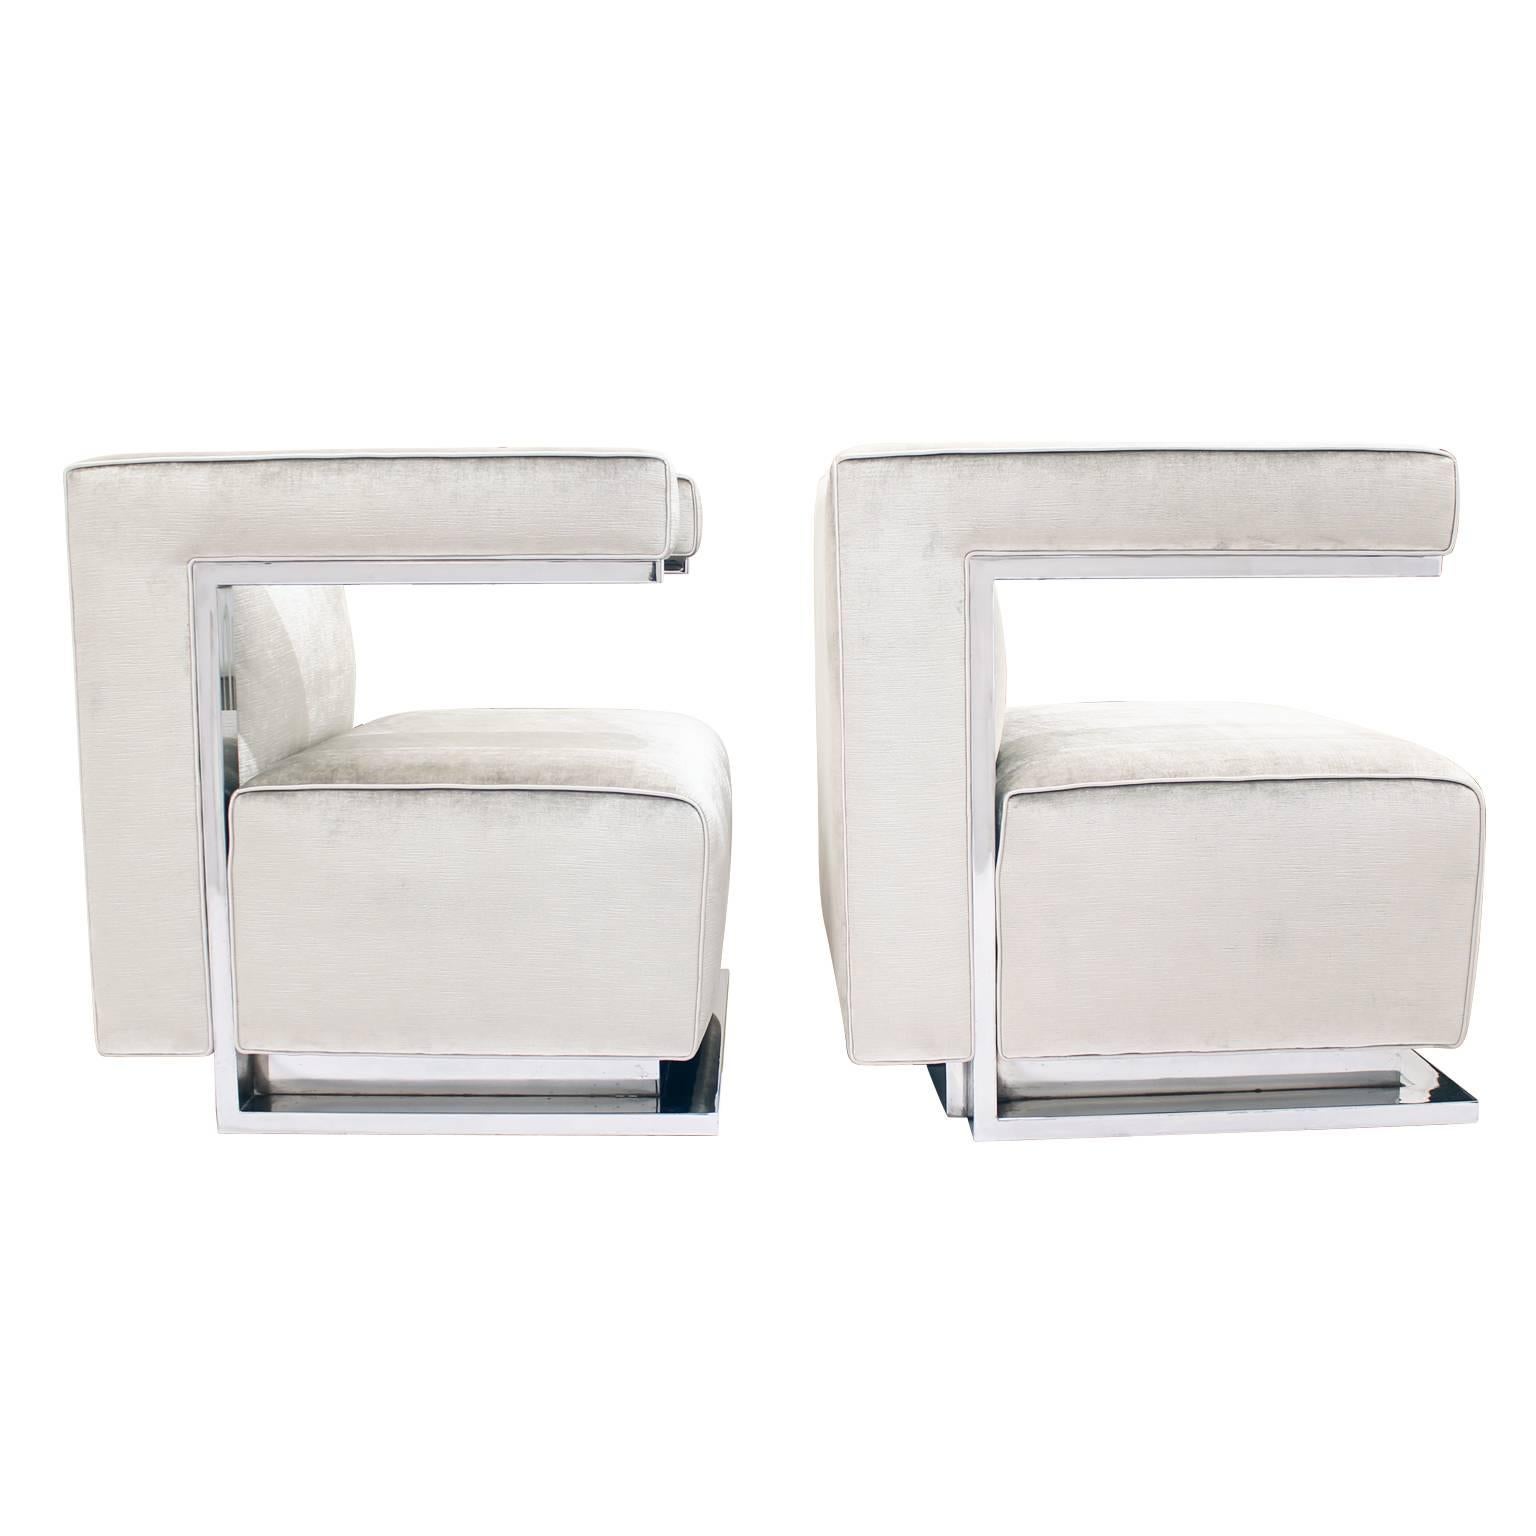 Art Deco Walter Gropius Cubist Steel and Chrome Armchairs For Sale